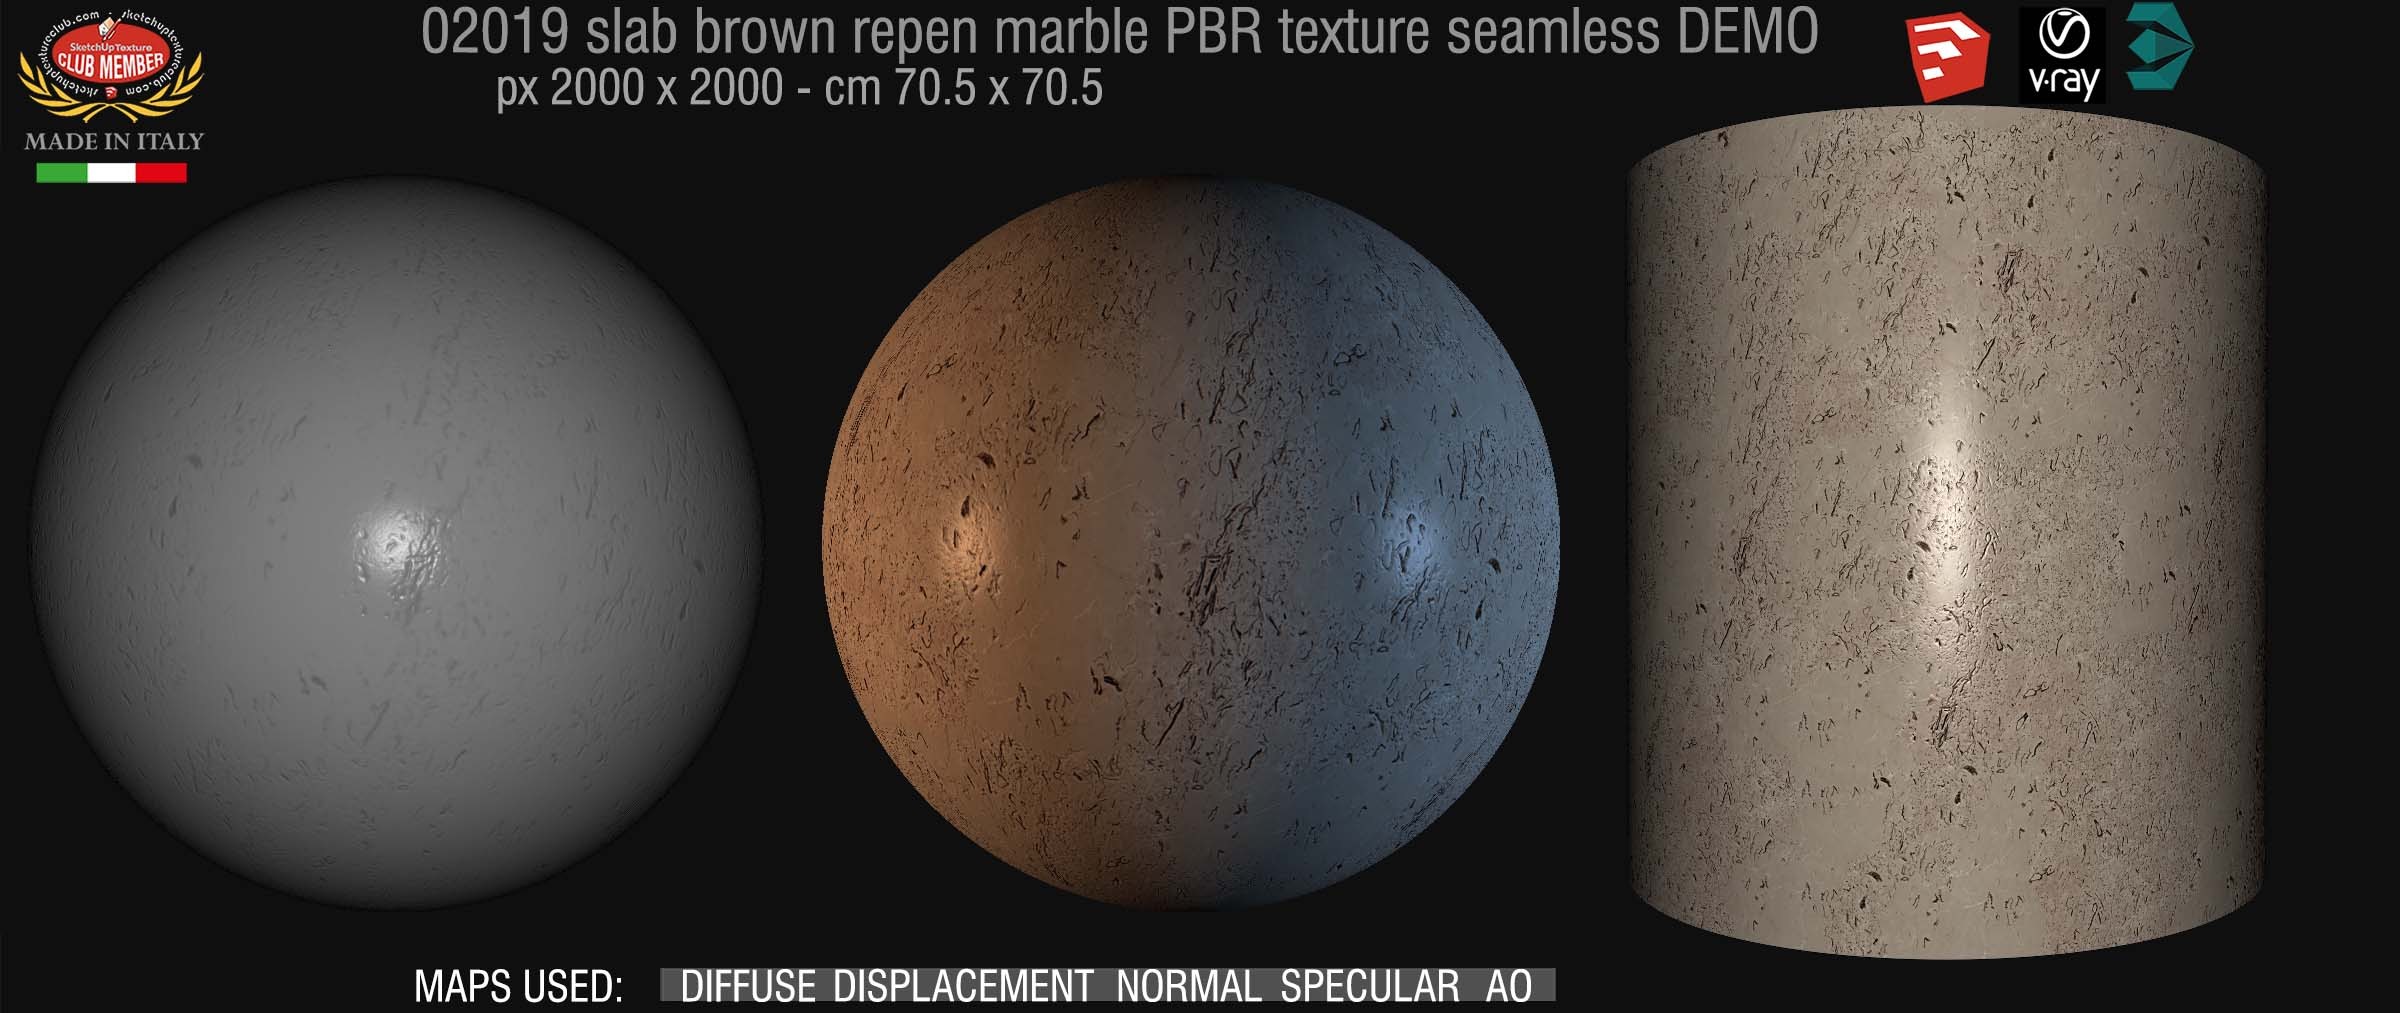 02019 slab brown repen marble PBR texture seamless DEMO